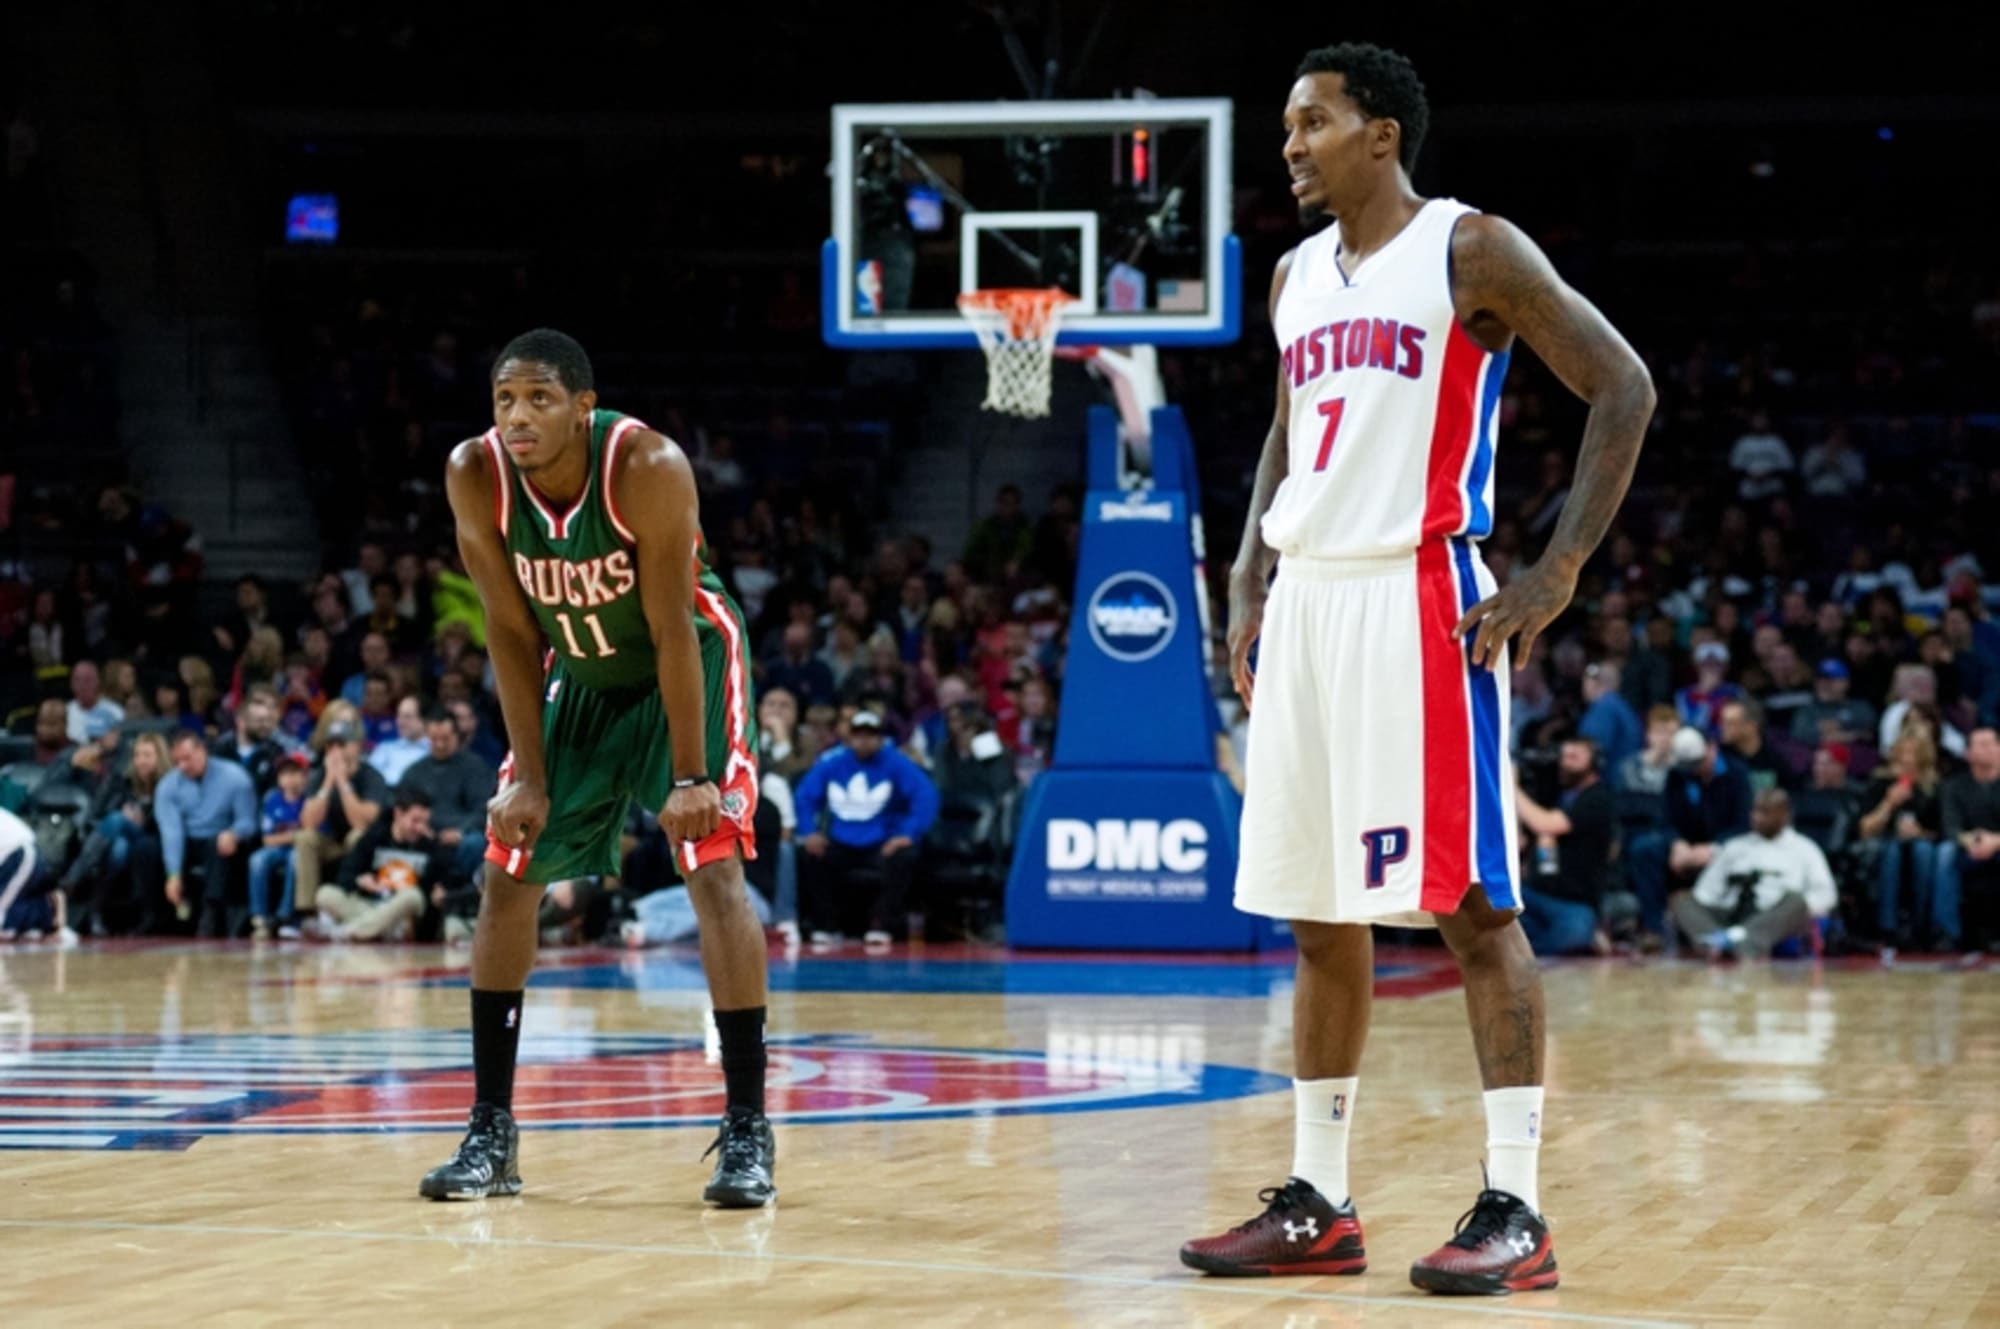 Pistons' Jennings, Bucks' Knight say their trade worked out